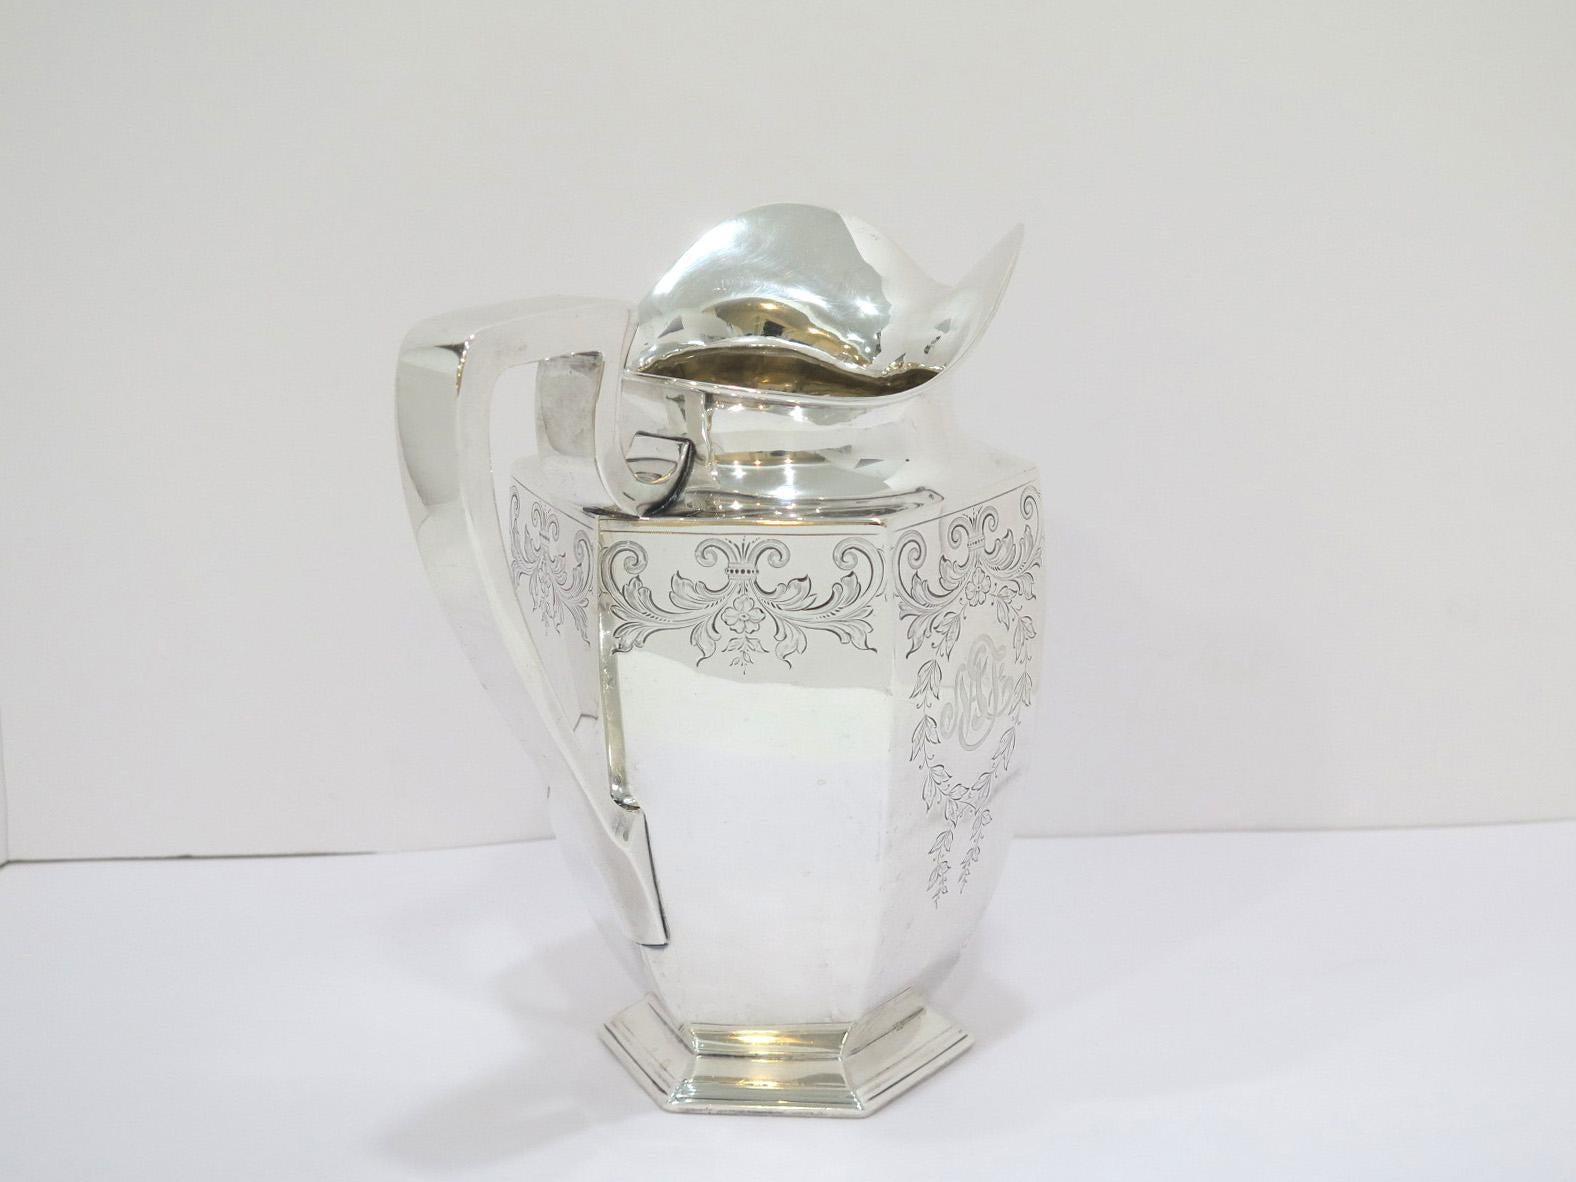 9.25 in Sterling Silver Dominick & Haff Antique Floral Scroll Hexagonal Pitcher 1